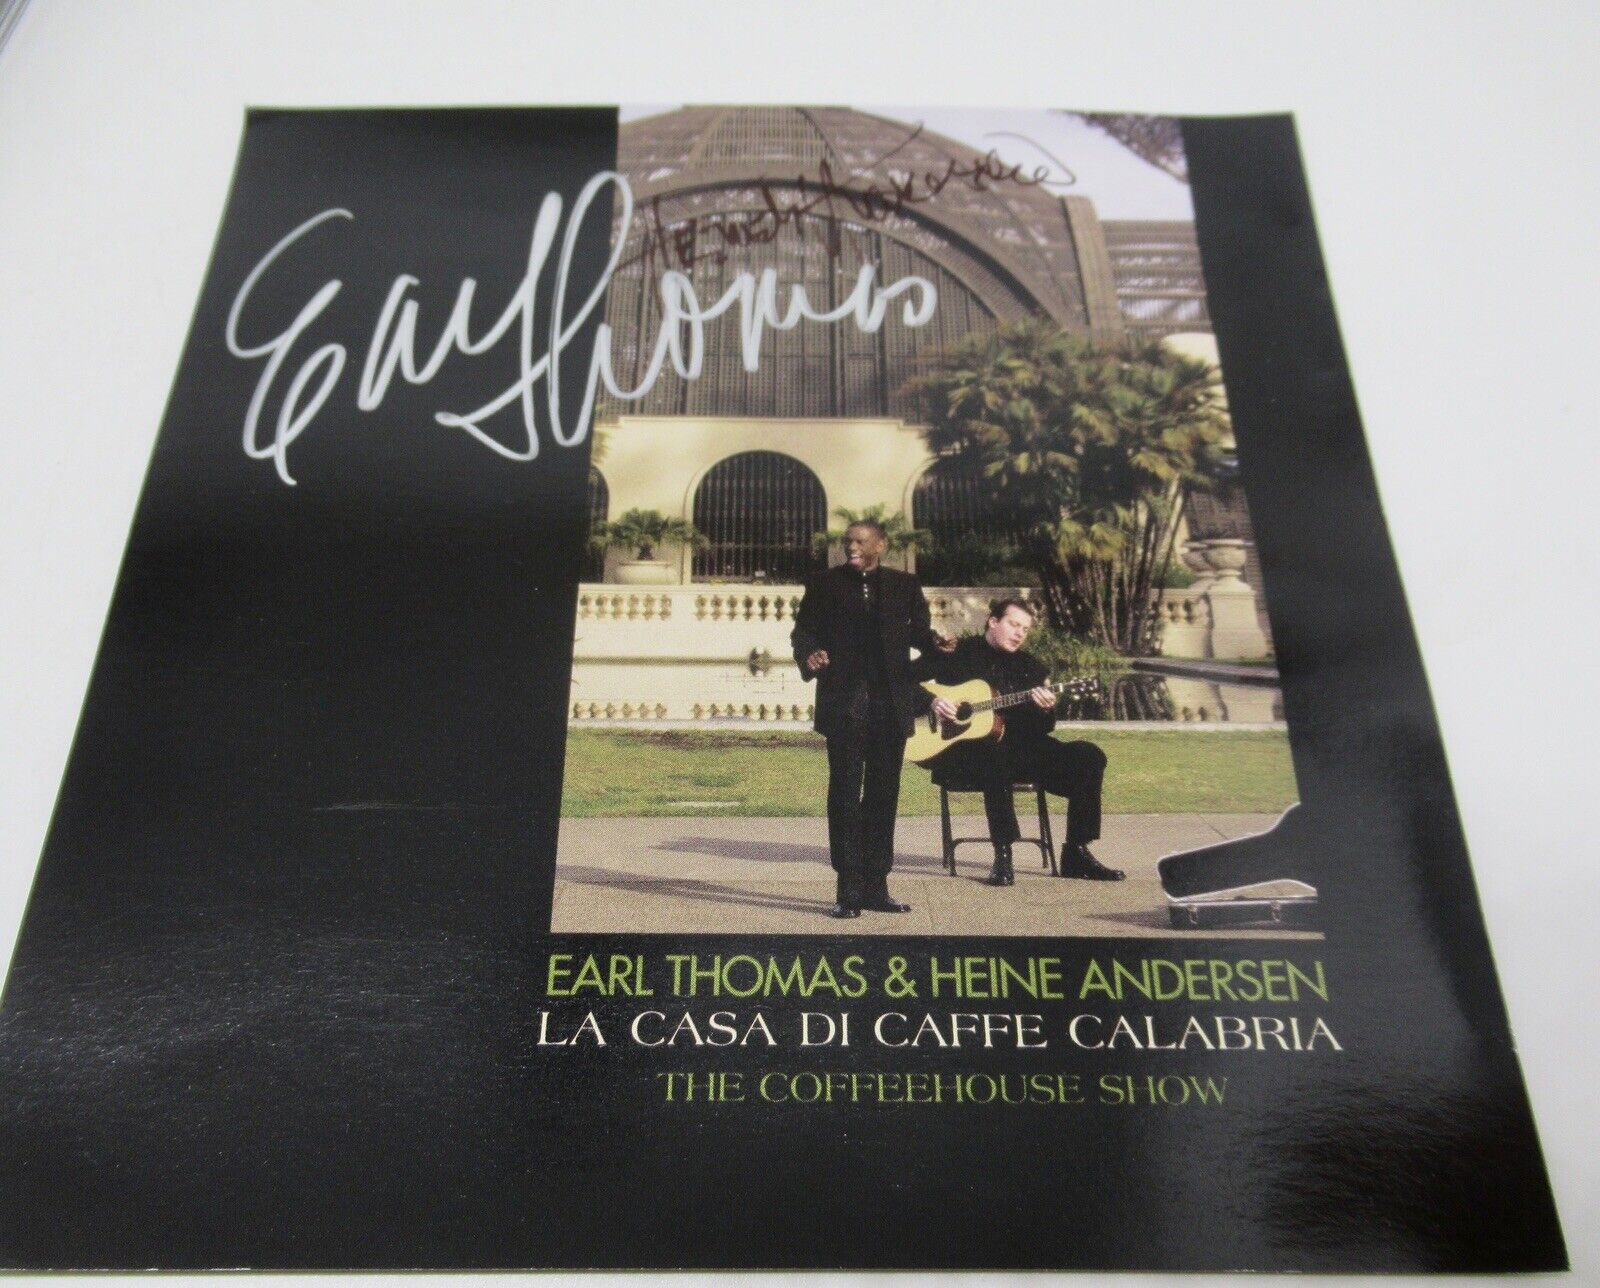 Earl Thomas - Heine Anderson The Coffehouse Show Autographed Compact Disc 2004